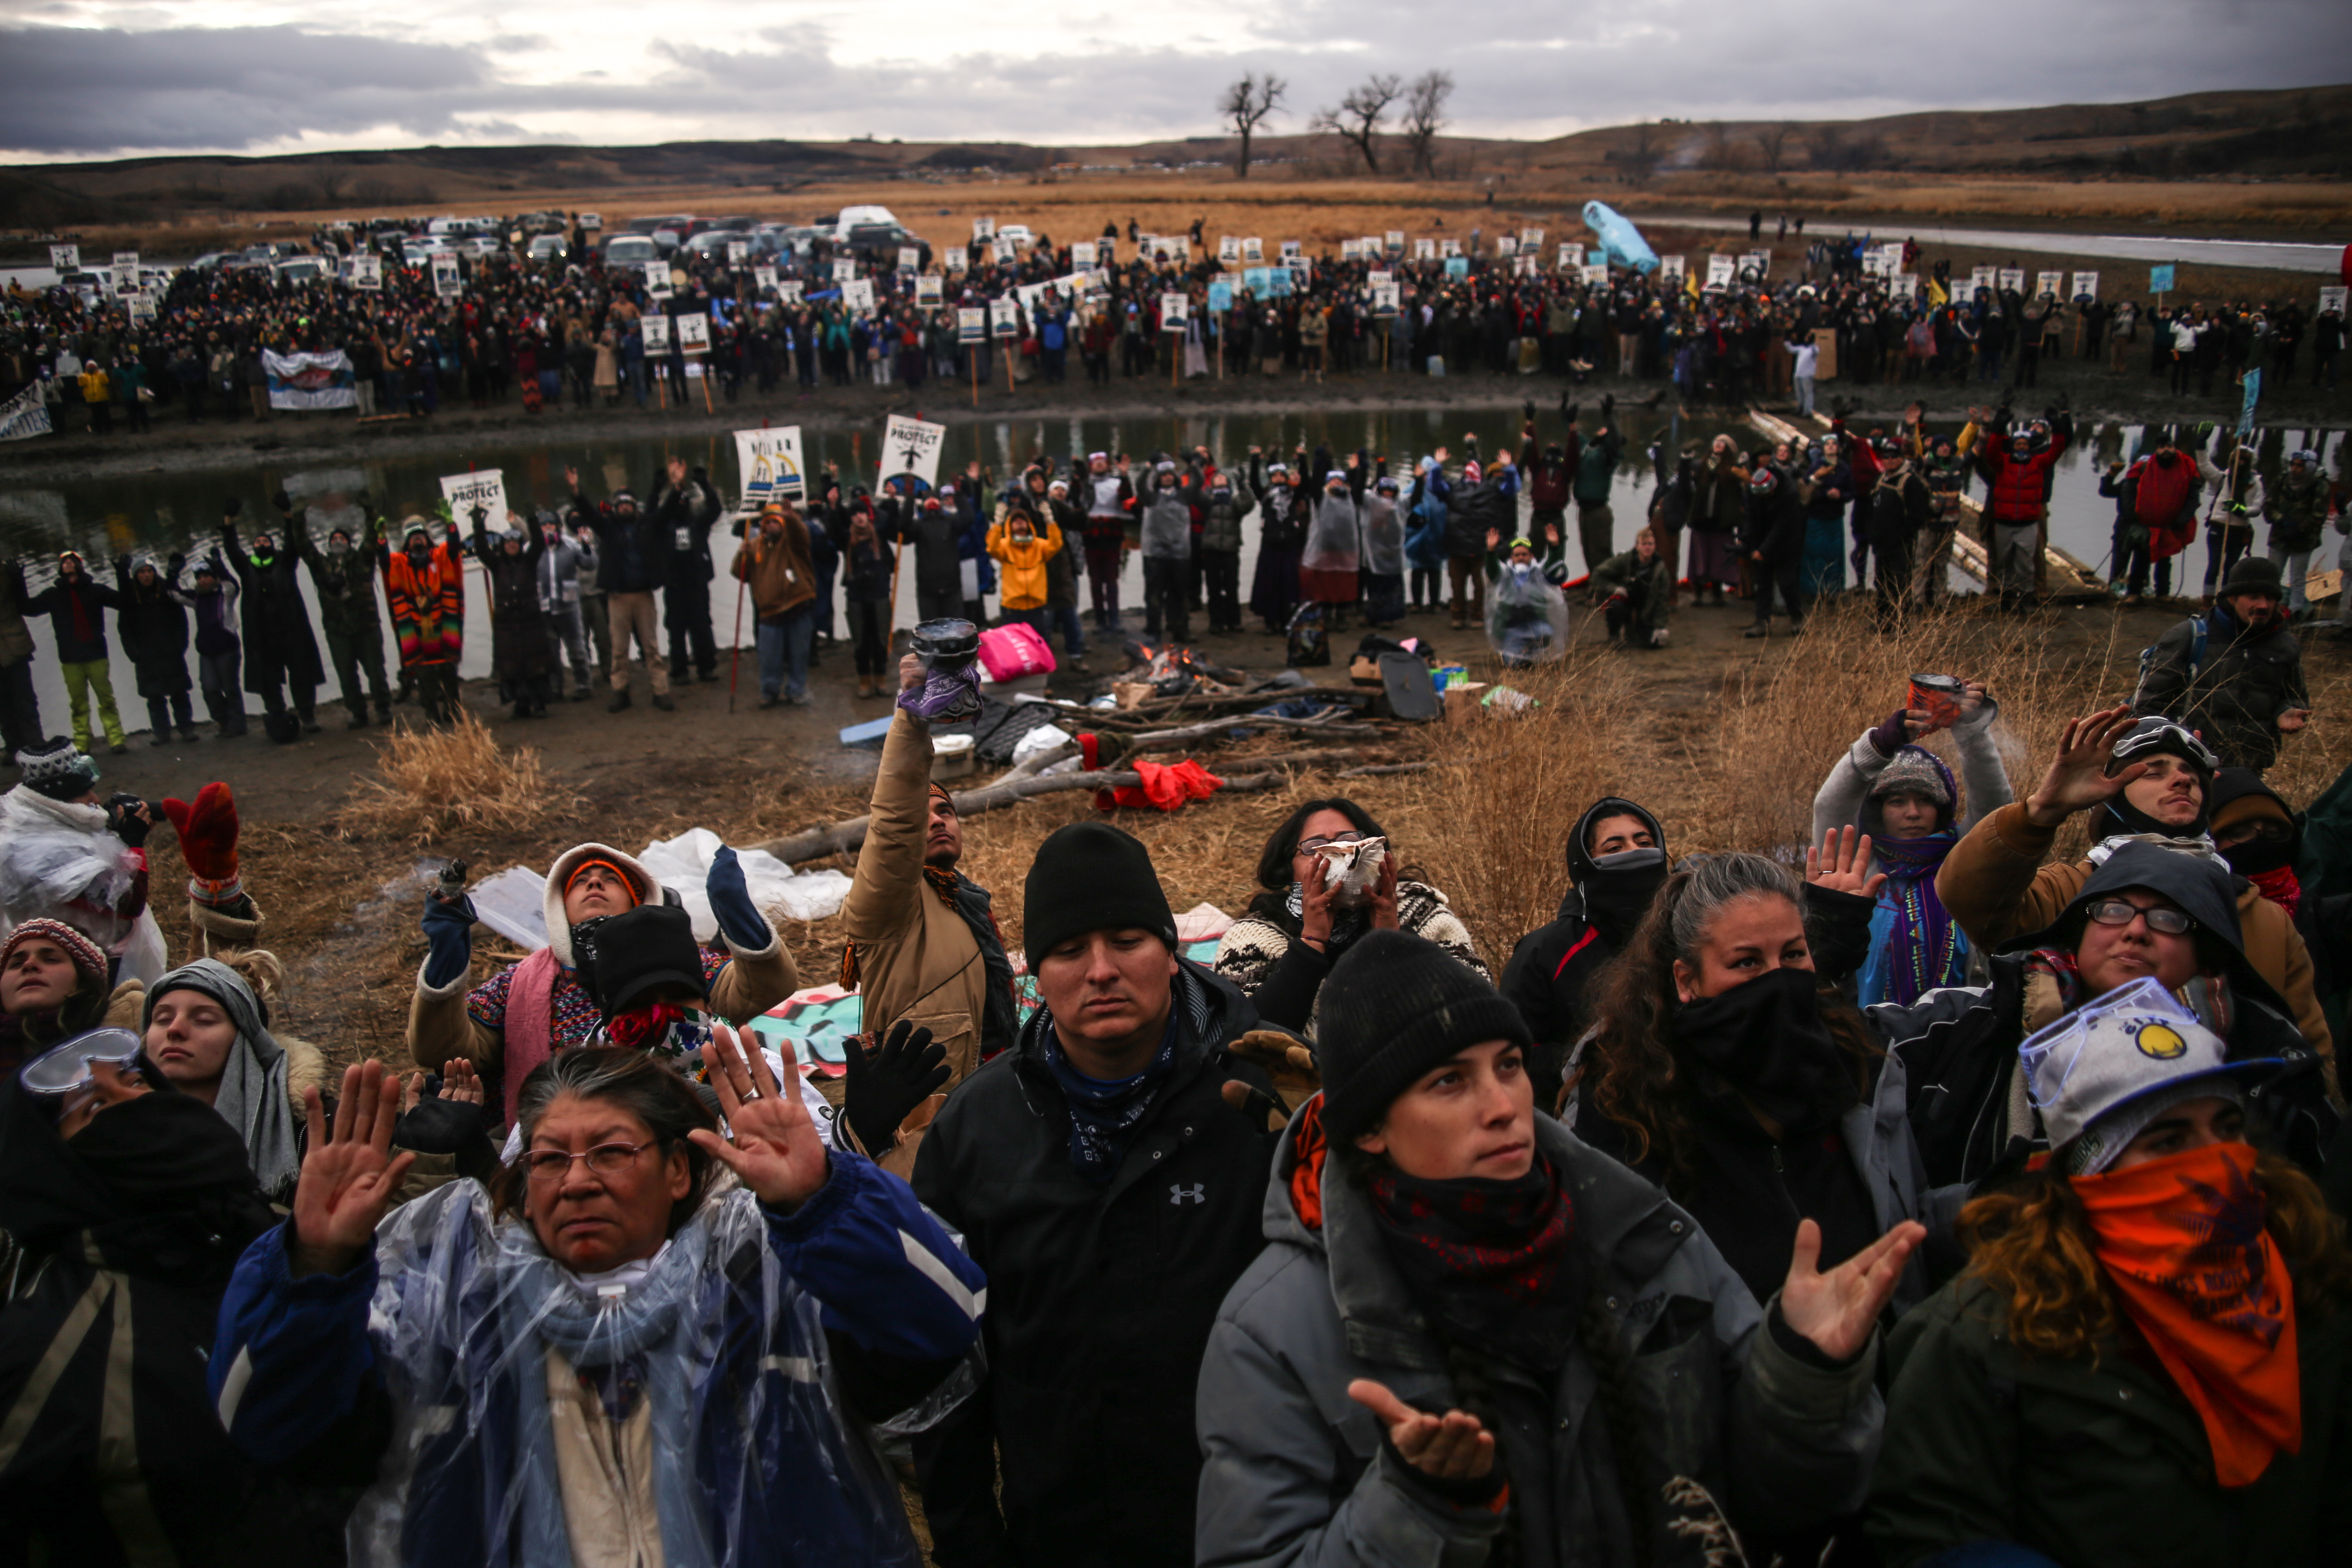 Oil and Water: Conflicts Over the Dakota Access Pipeline